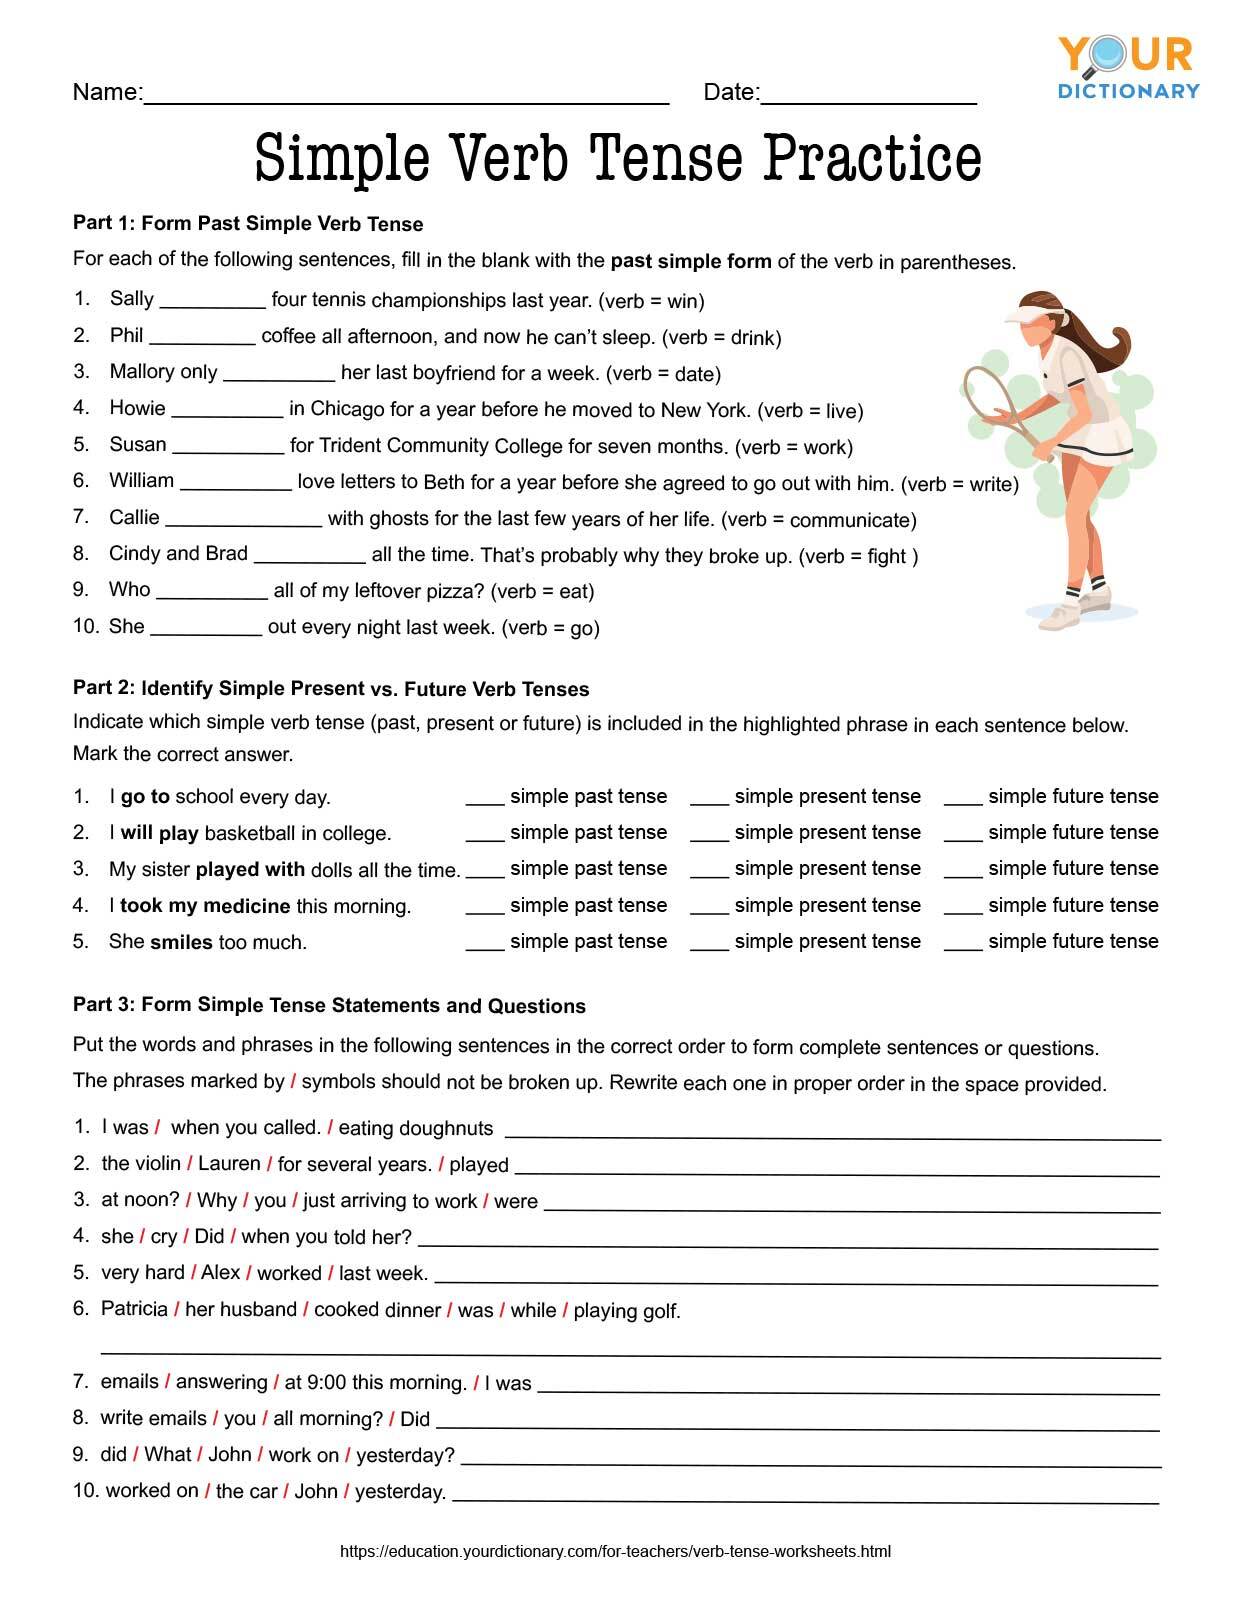 verb tense worksheets for middle and high school